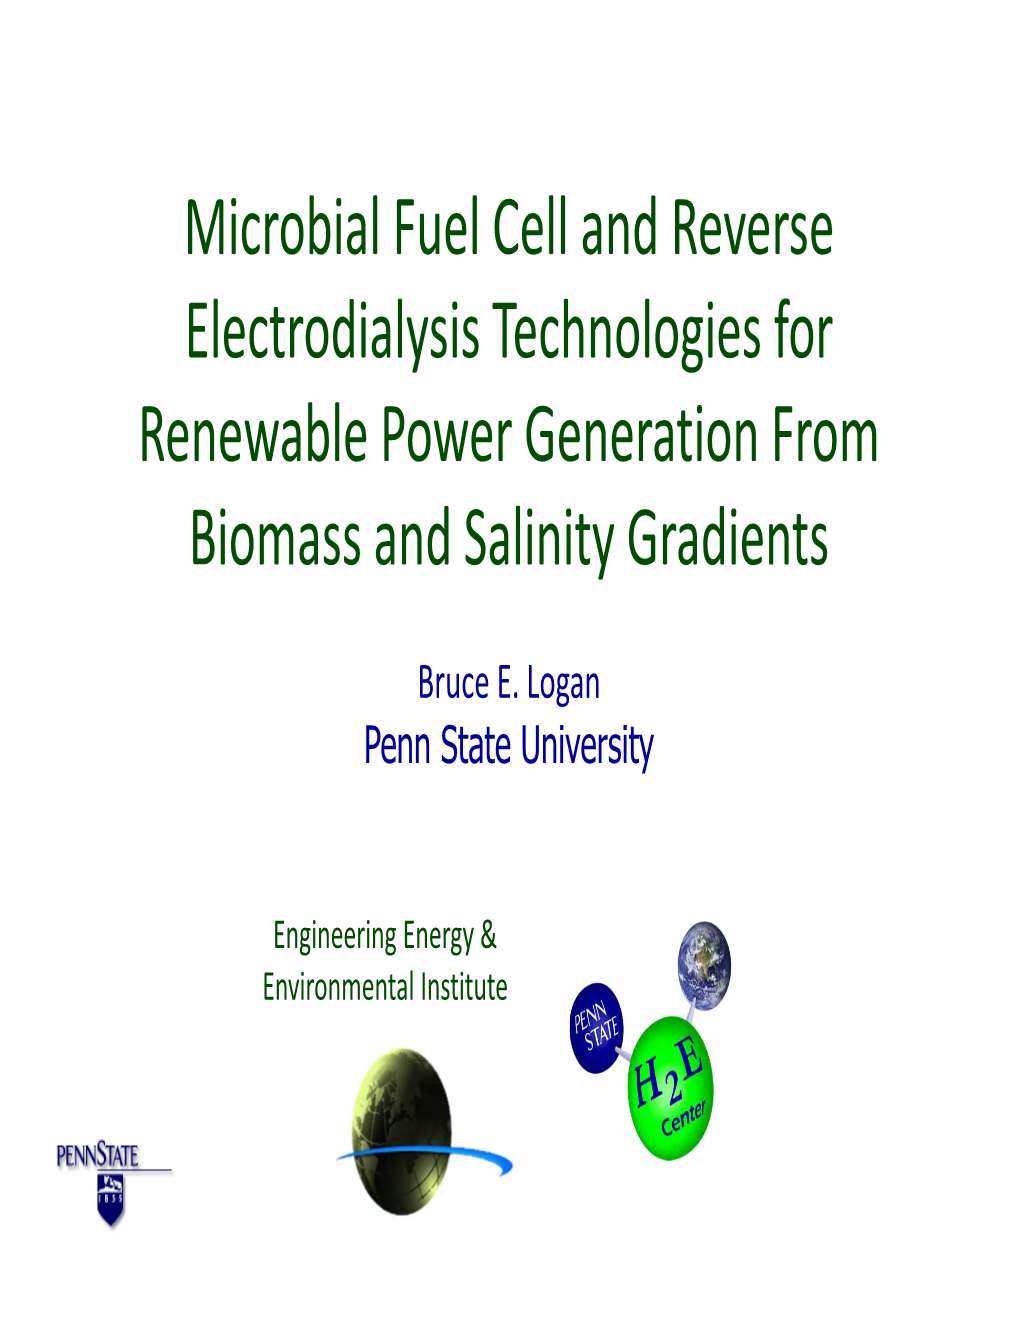 Microbial Fuel Cell and Reverse Electrodialysis Technologies for Renewable Power Generation from Biomass and Salinity Gradients